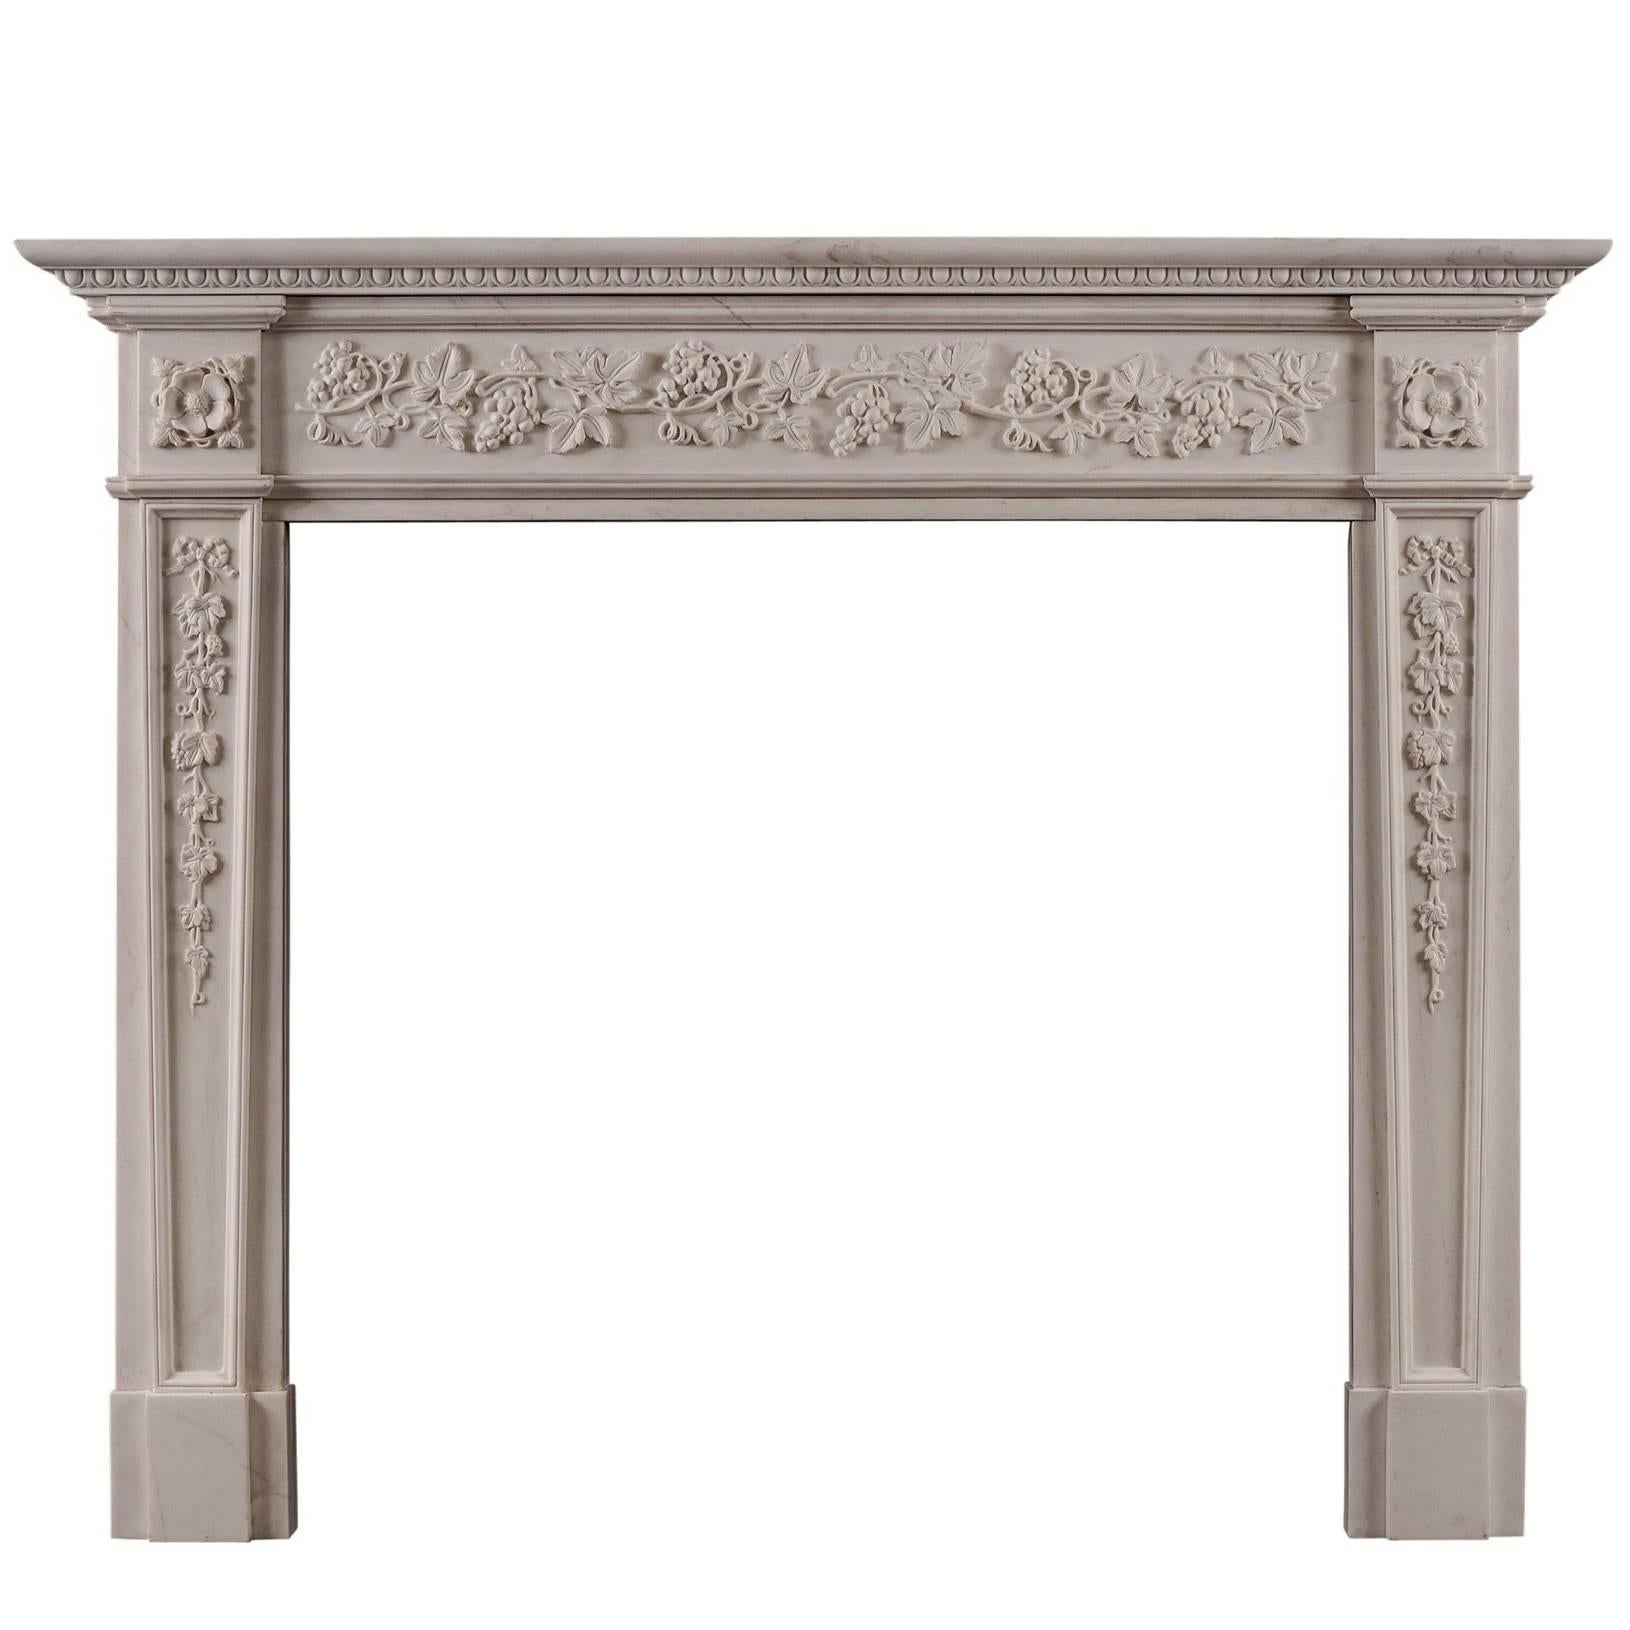 English Regency Style White Marble Fireplace For Sale